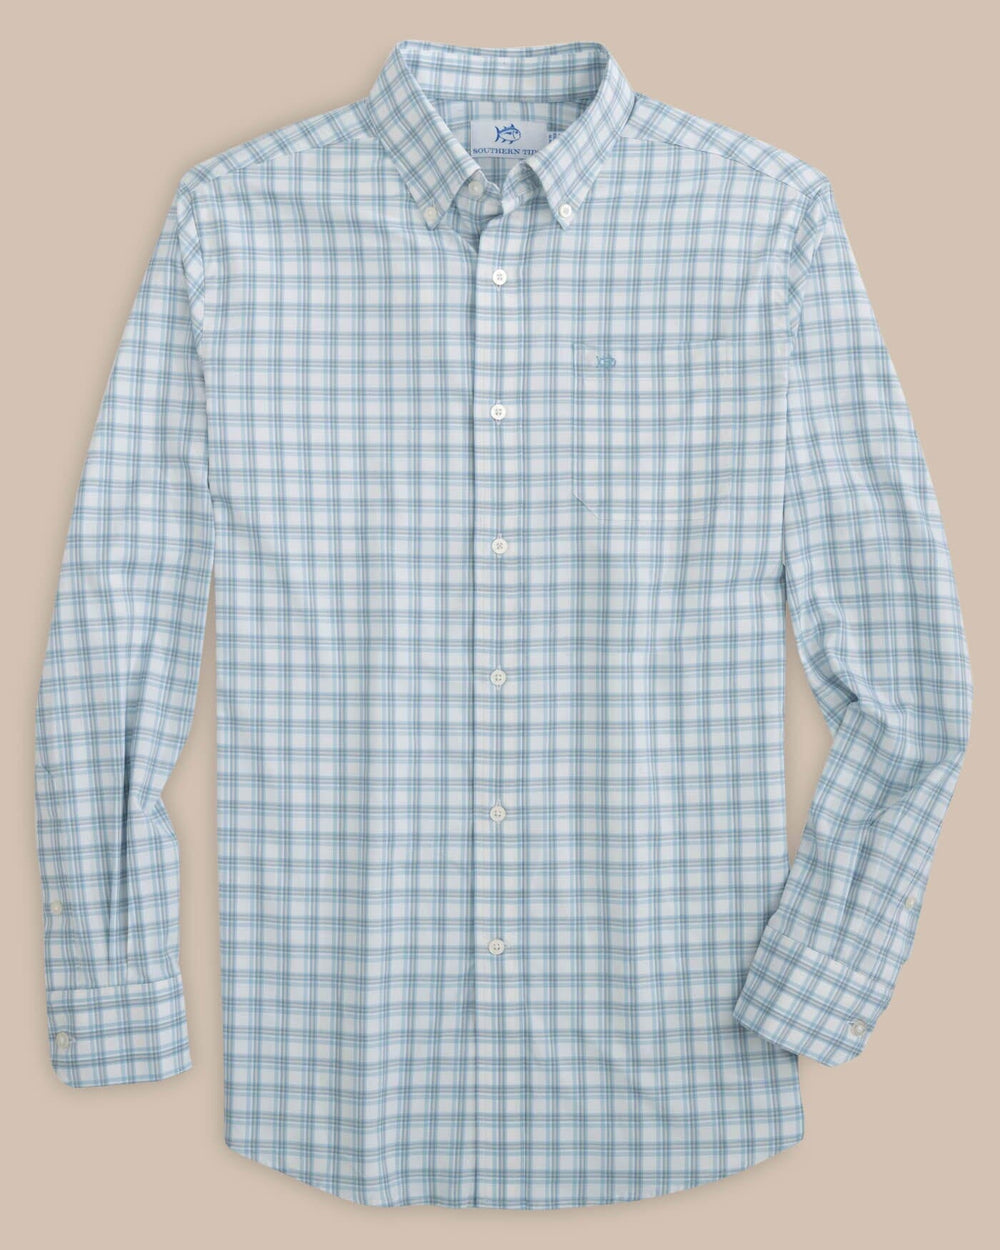 The front view of the Southern Tide Ellington Plaid Intercoastal Sport Shirts by Southern Tide - Dream Blue